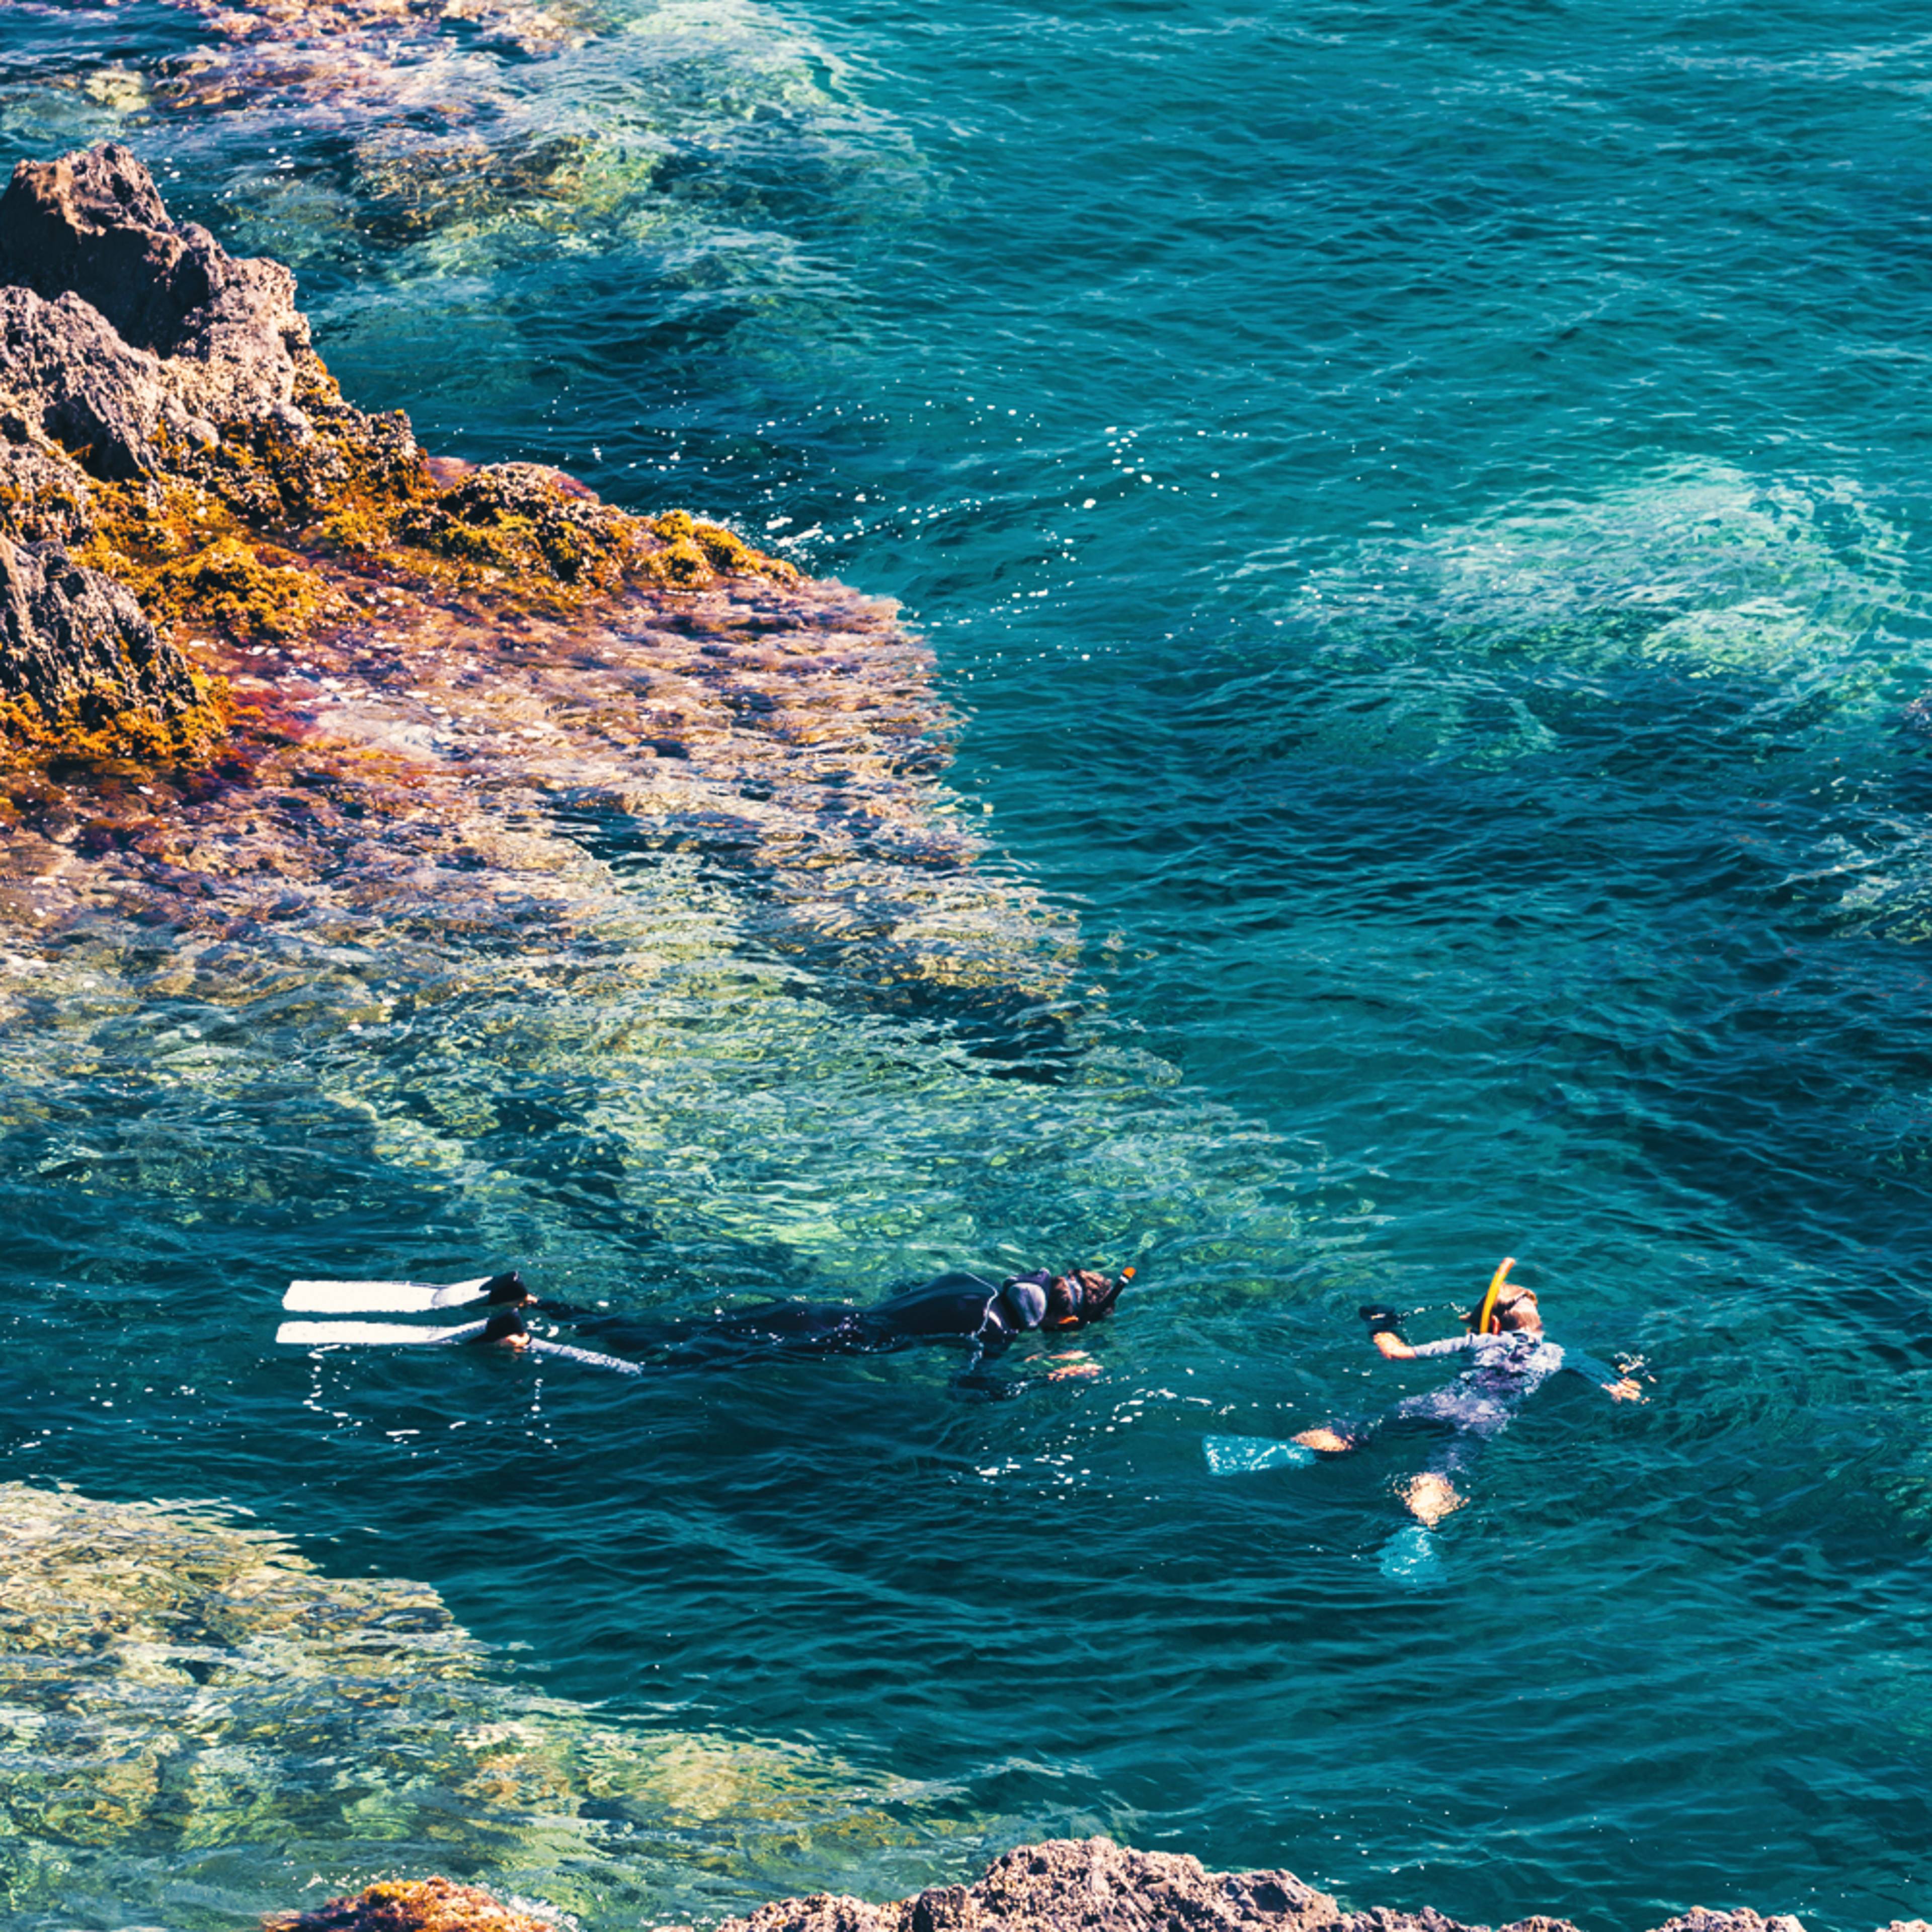 Experience snorkeling in France with a hand-picked local expert